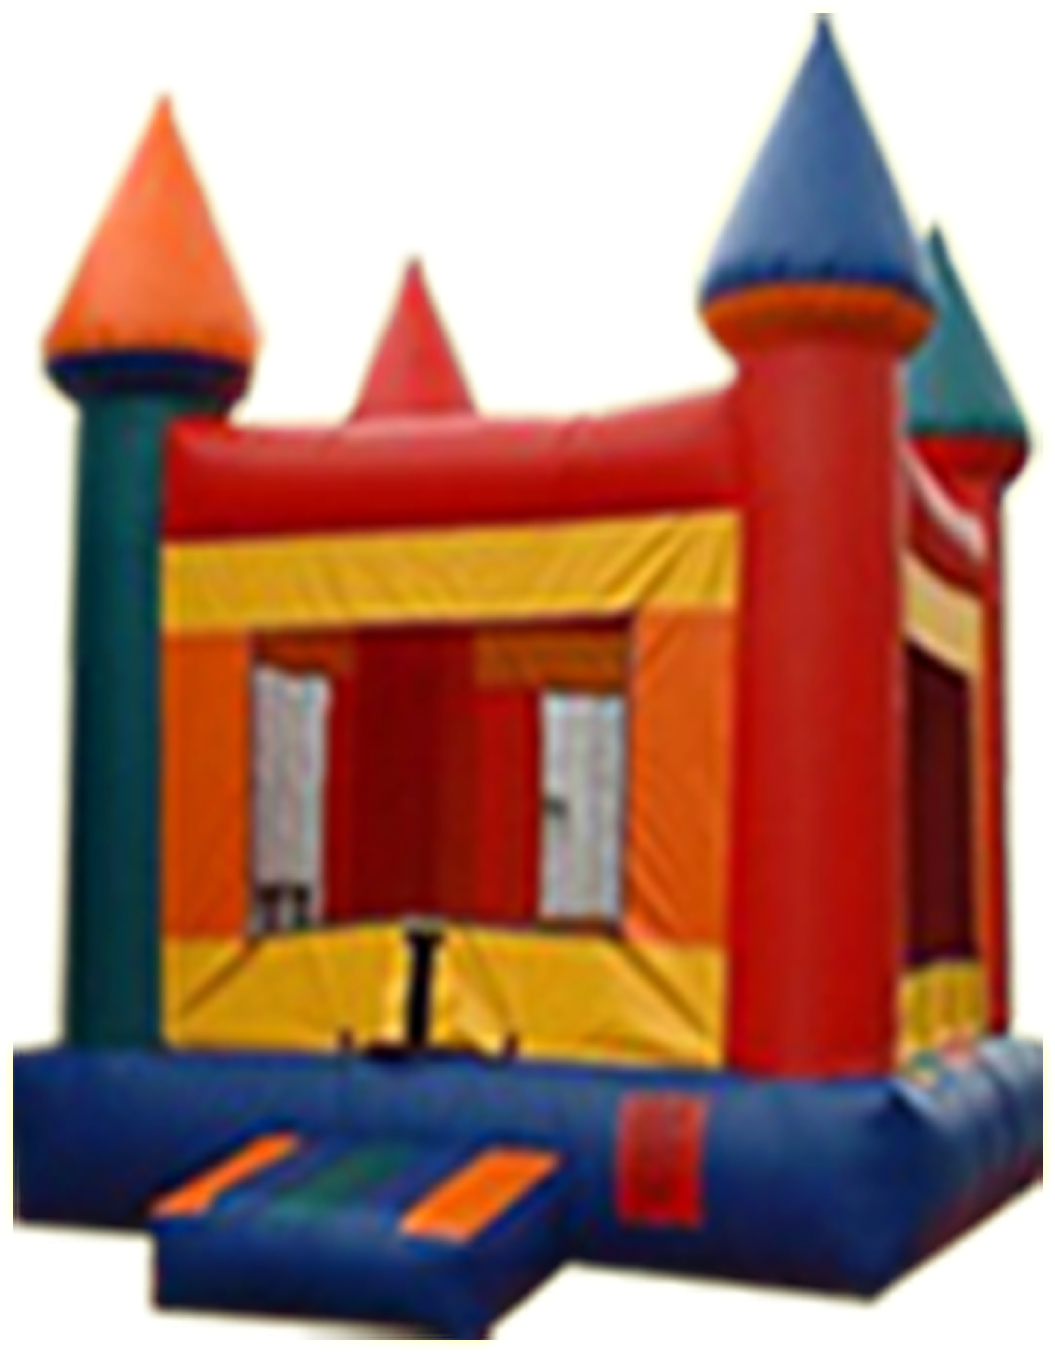 205party Pick Uo Your Party Silly Willy Castle Bounce - Bounce Houses For Sale (1241x1404)